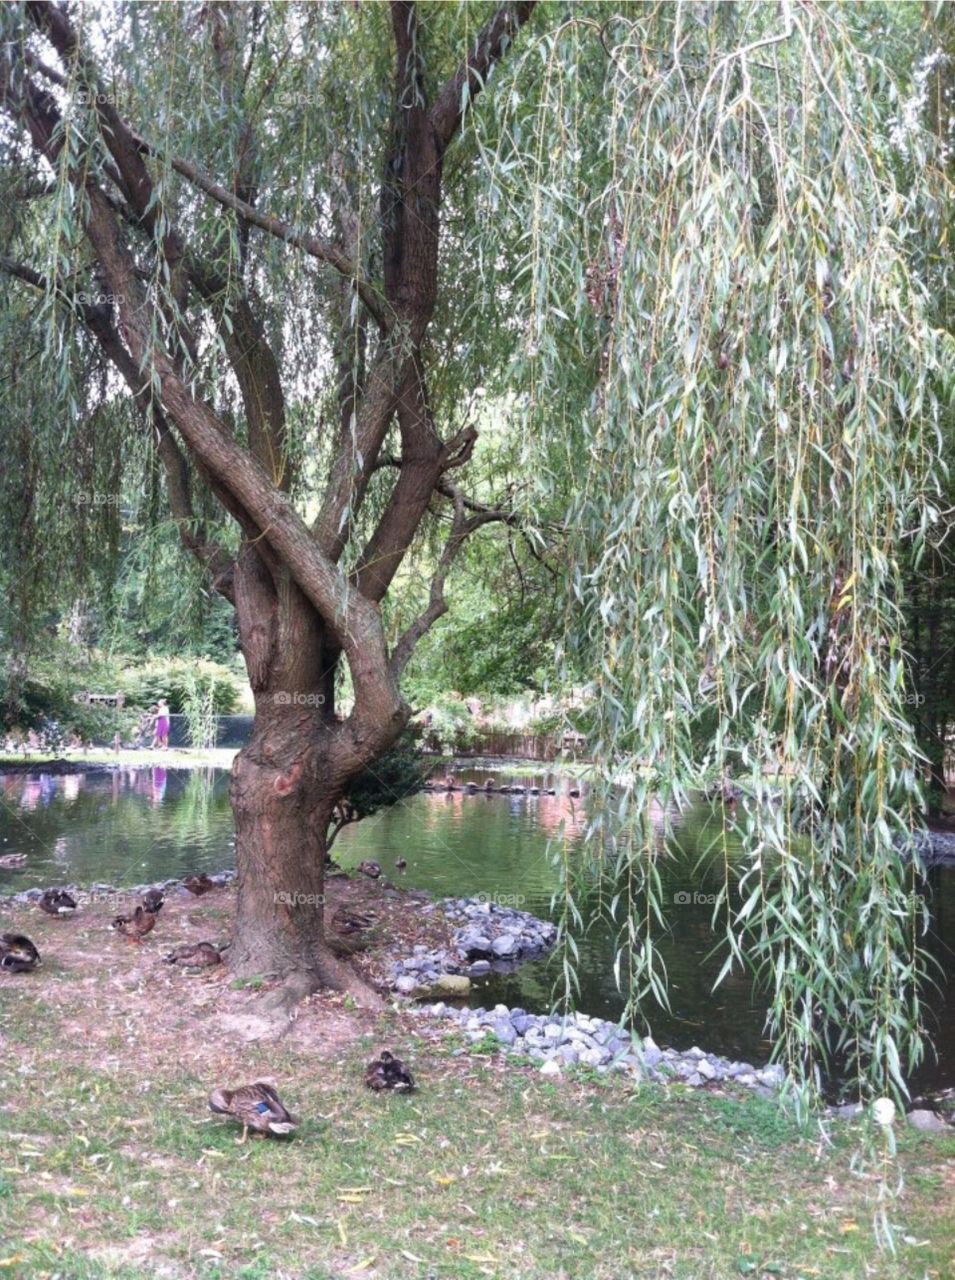 Quack Quack. Ducks playing under a weeping willow at the Cape May Zoo